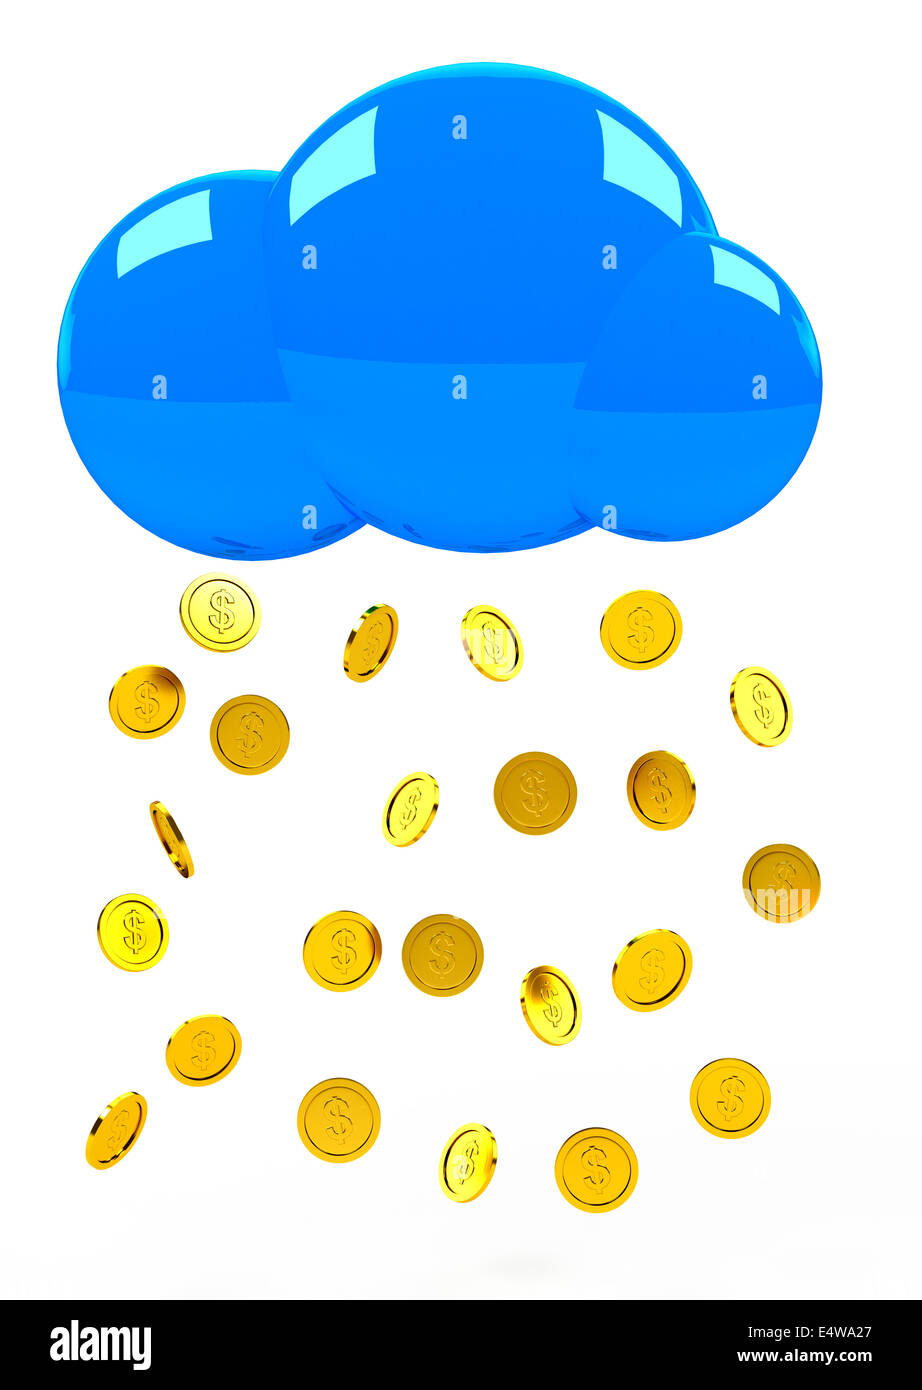 Raining gold coins with cloud. Stock Photo